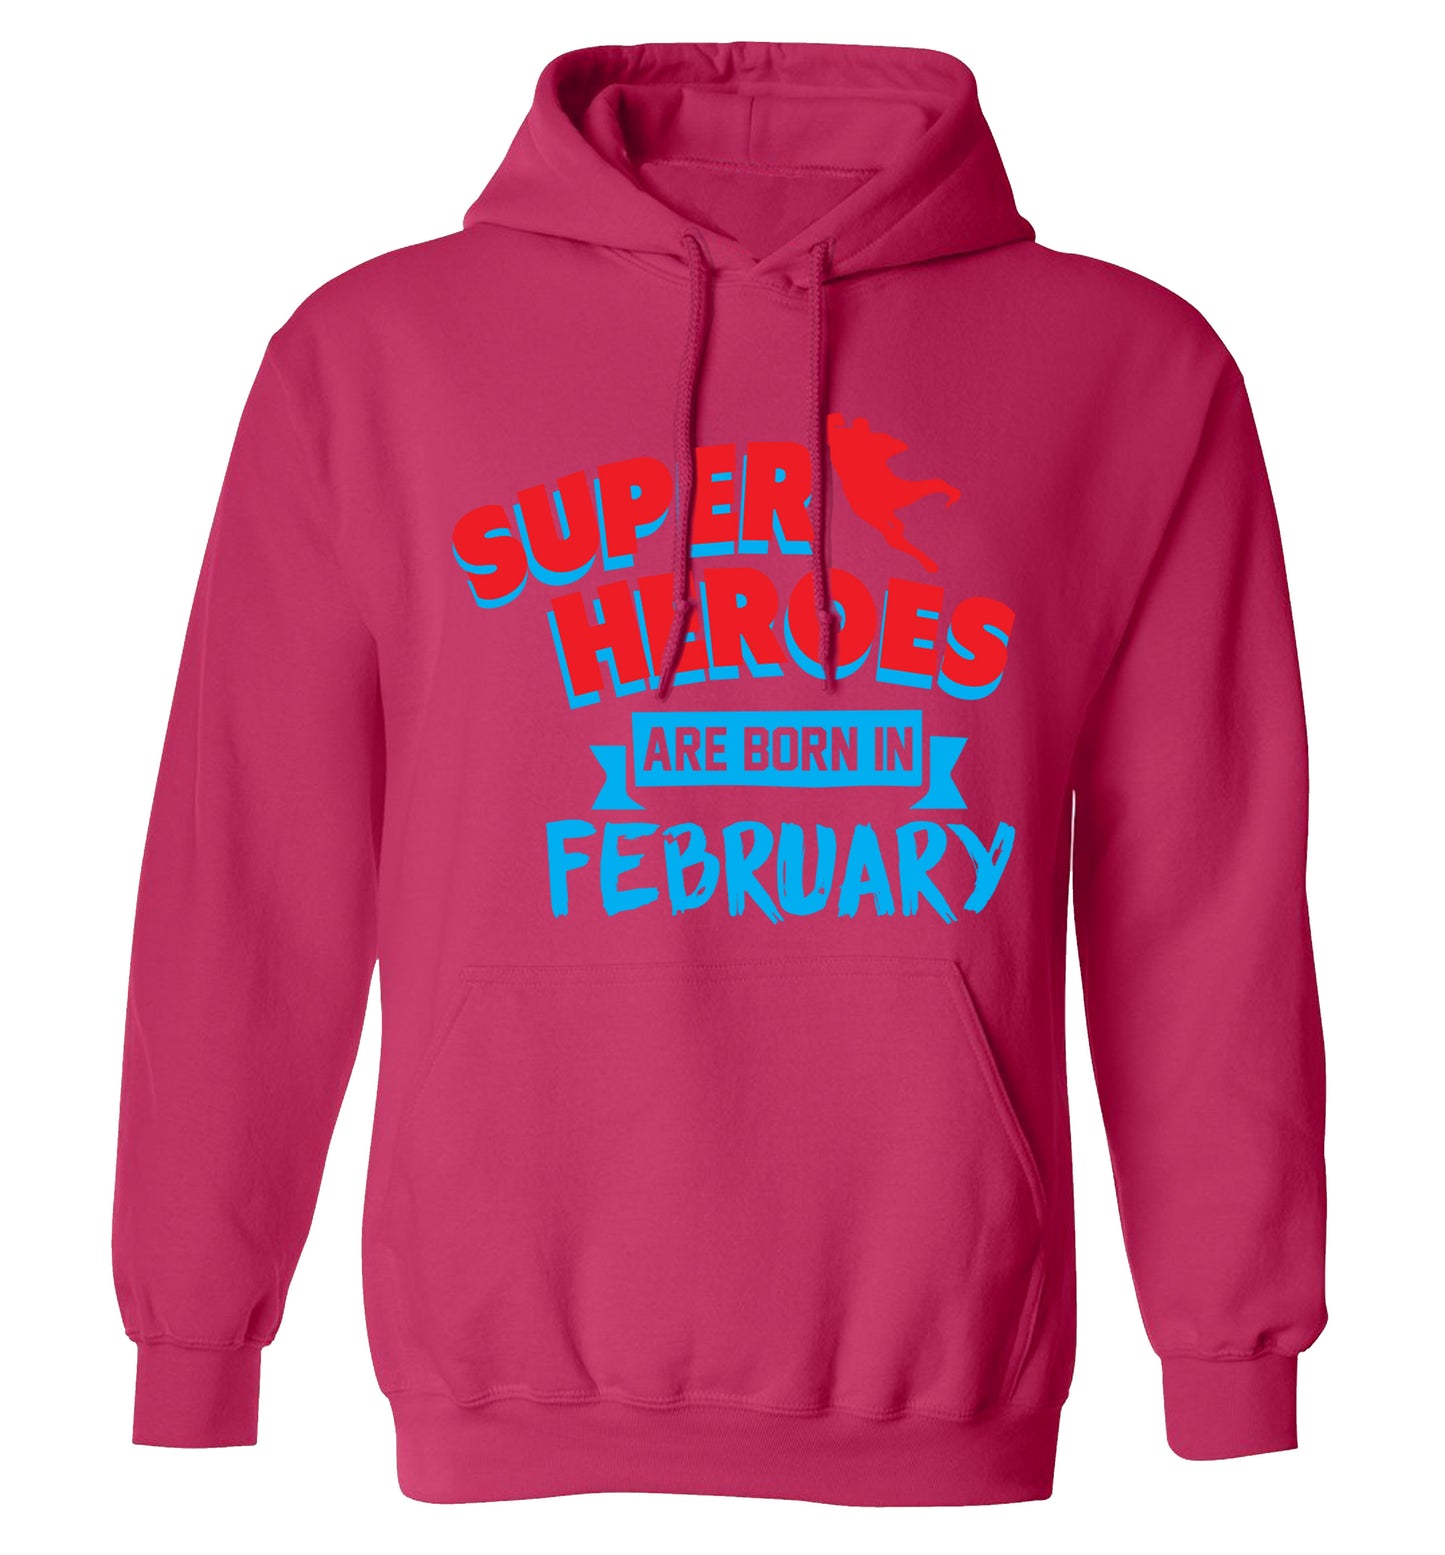 superheroes are born in February adults unisex pink hoodie 2XL